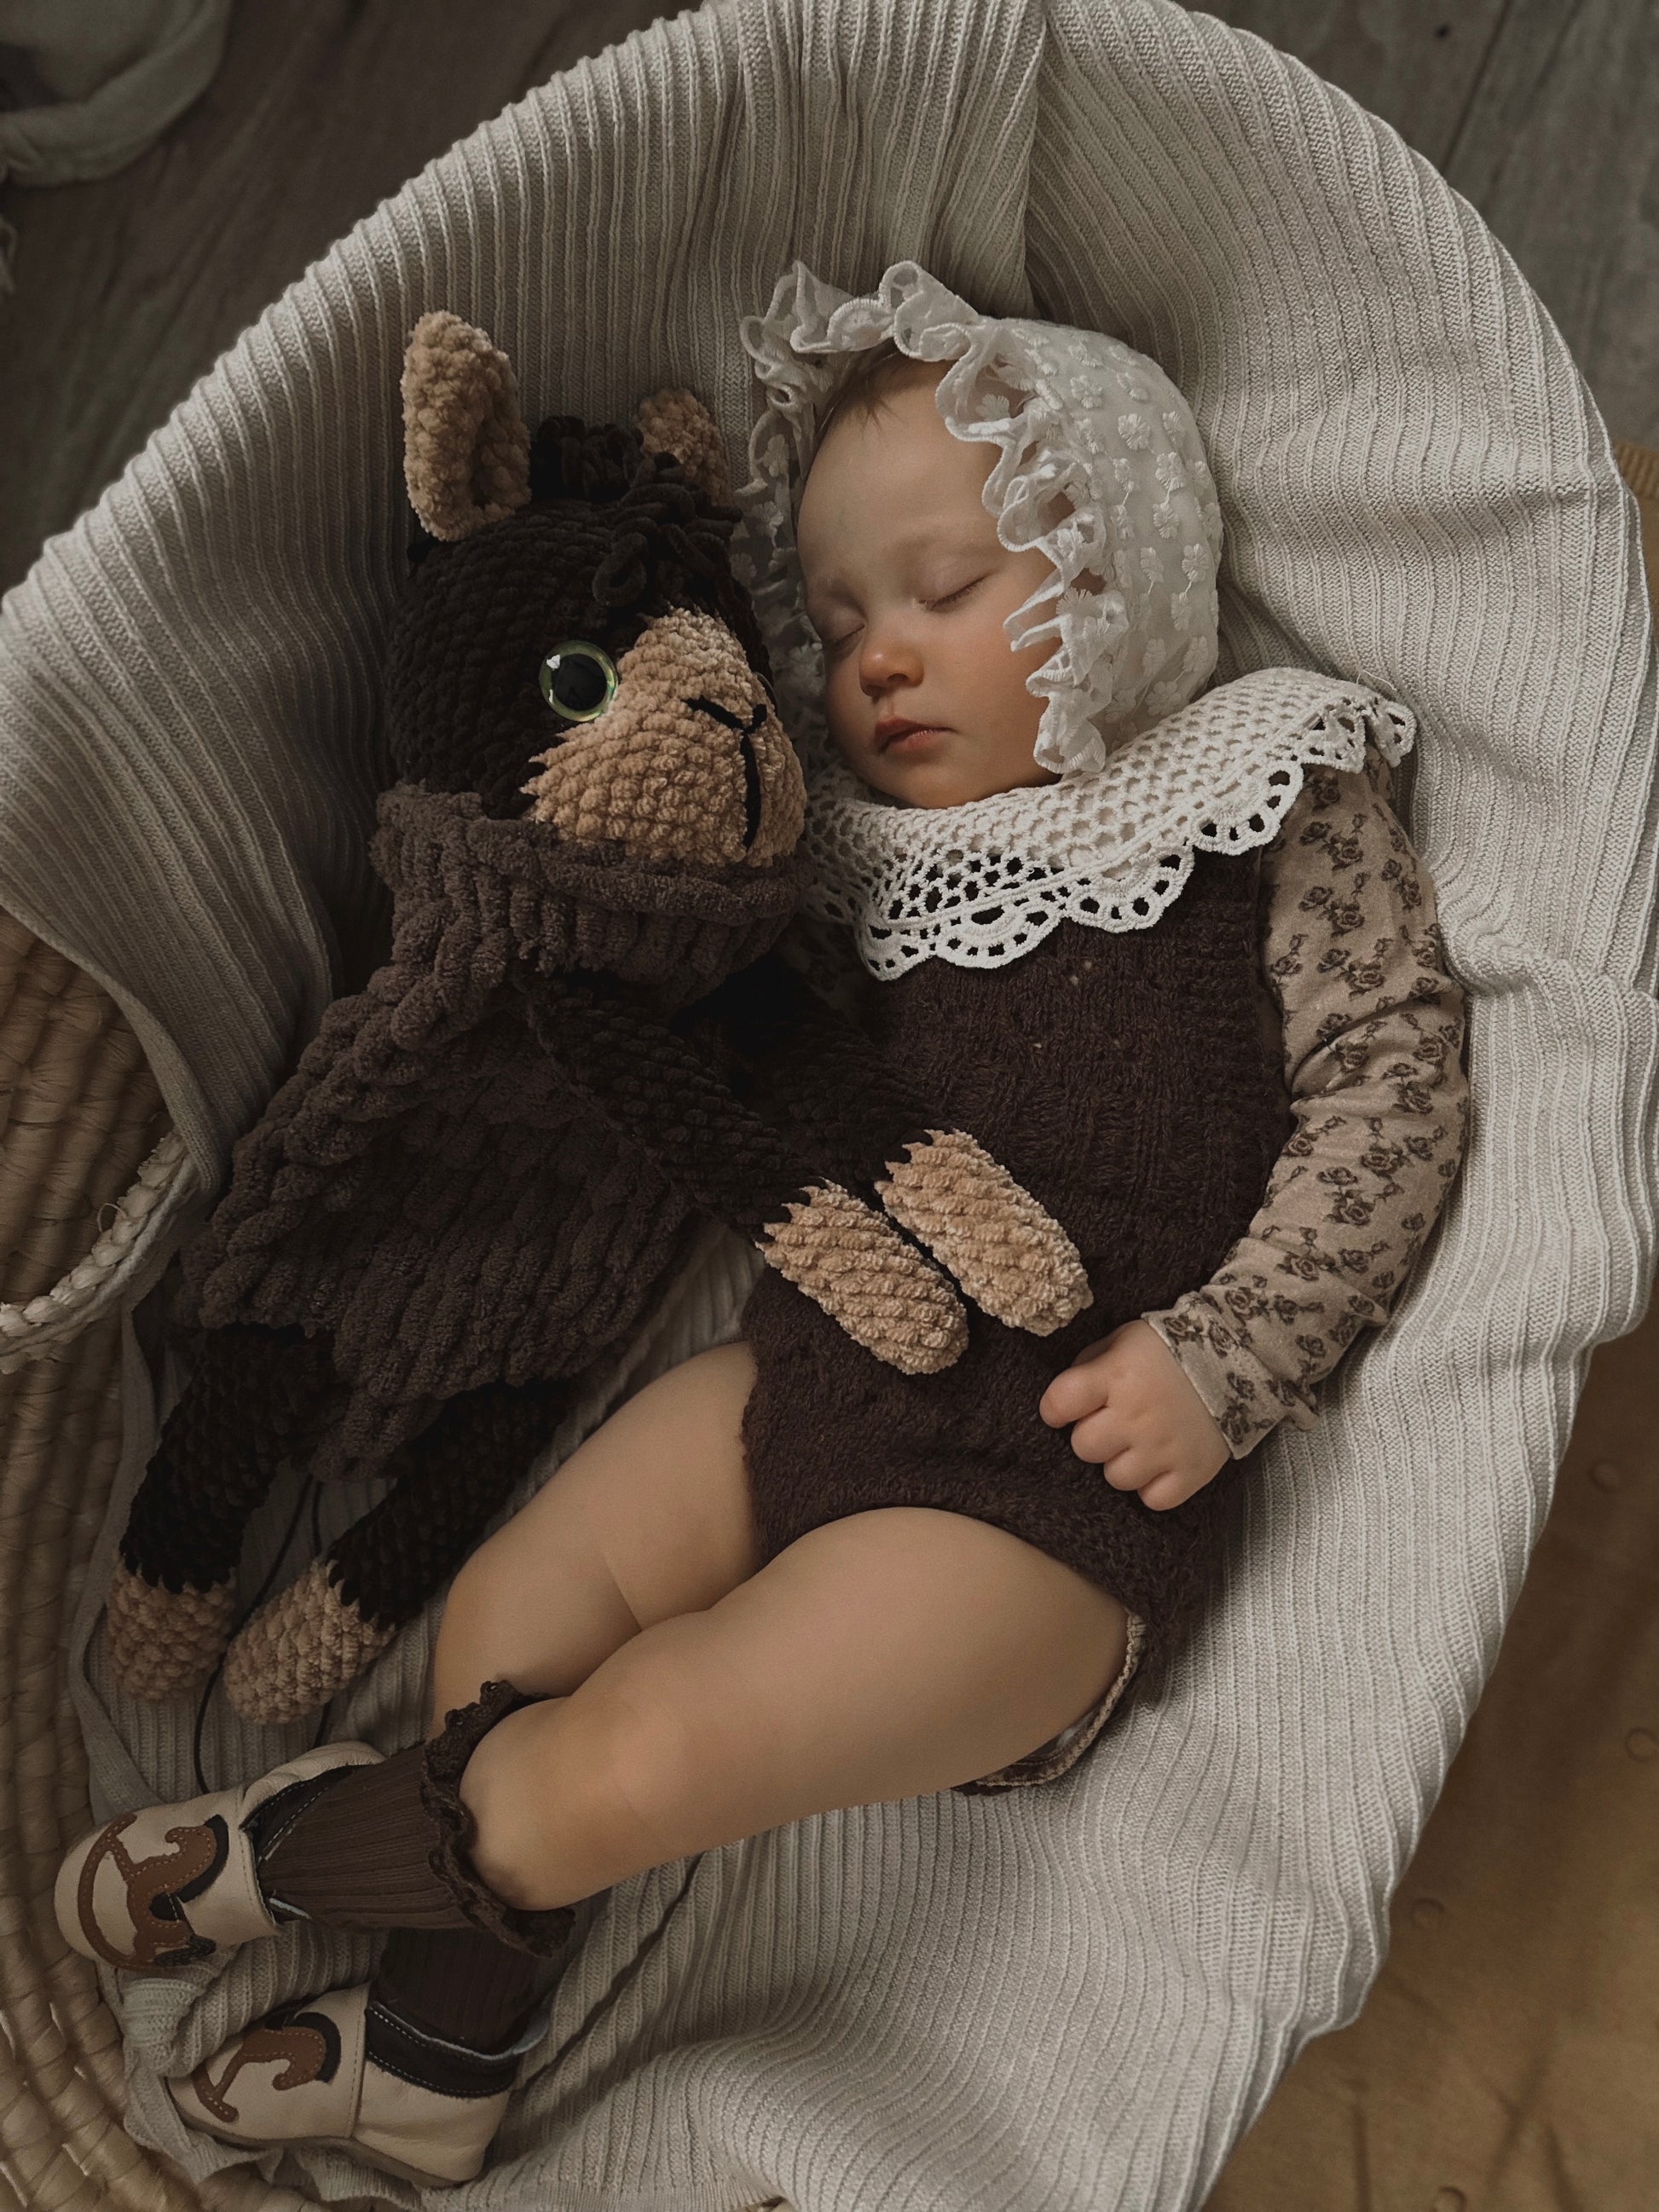  baby laying on a bed next to a stuffed alpaca toy in brown colours.